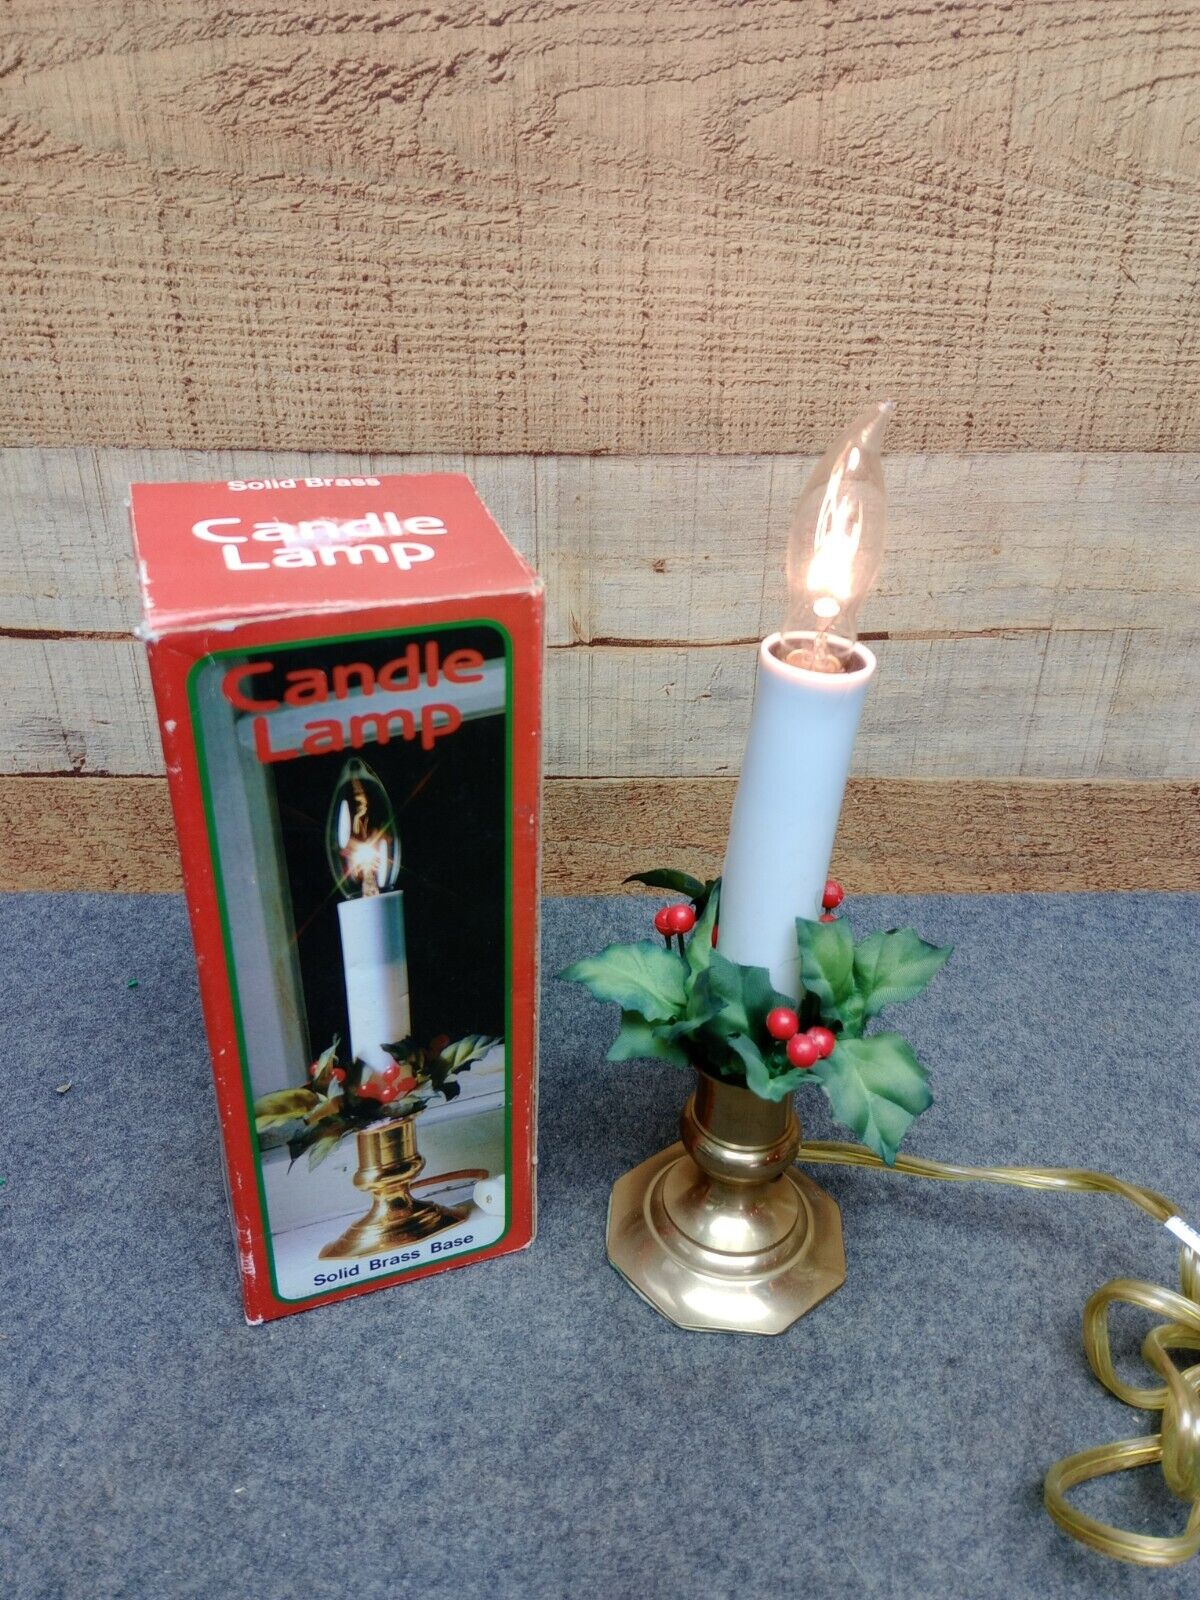 Vintage Electric Window Candle Lamp